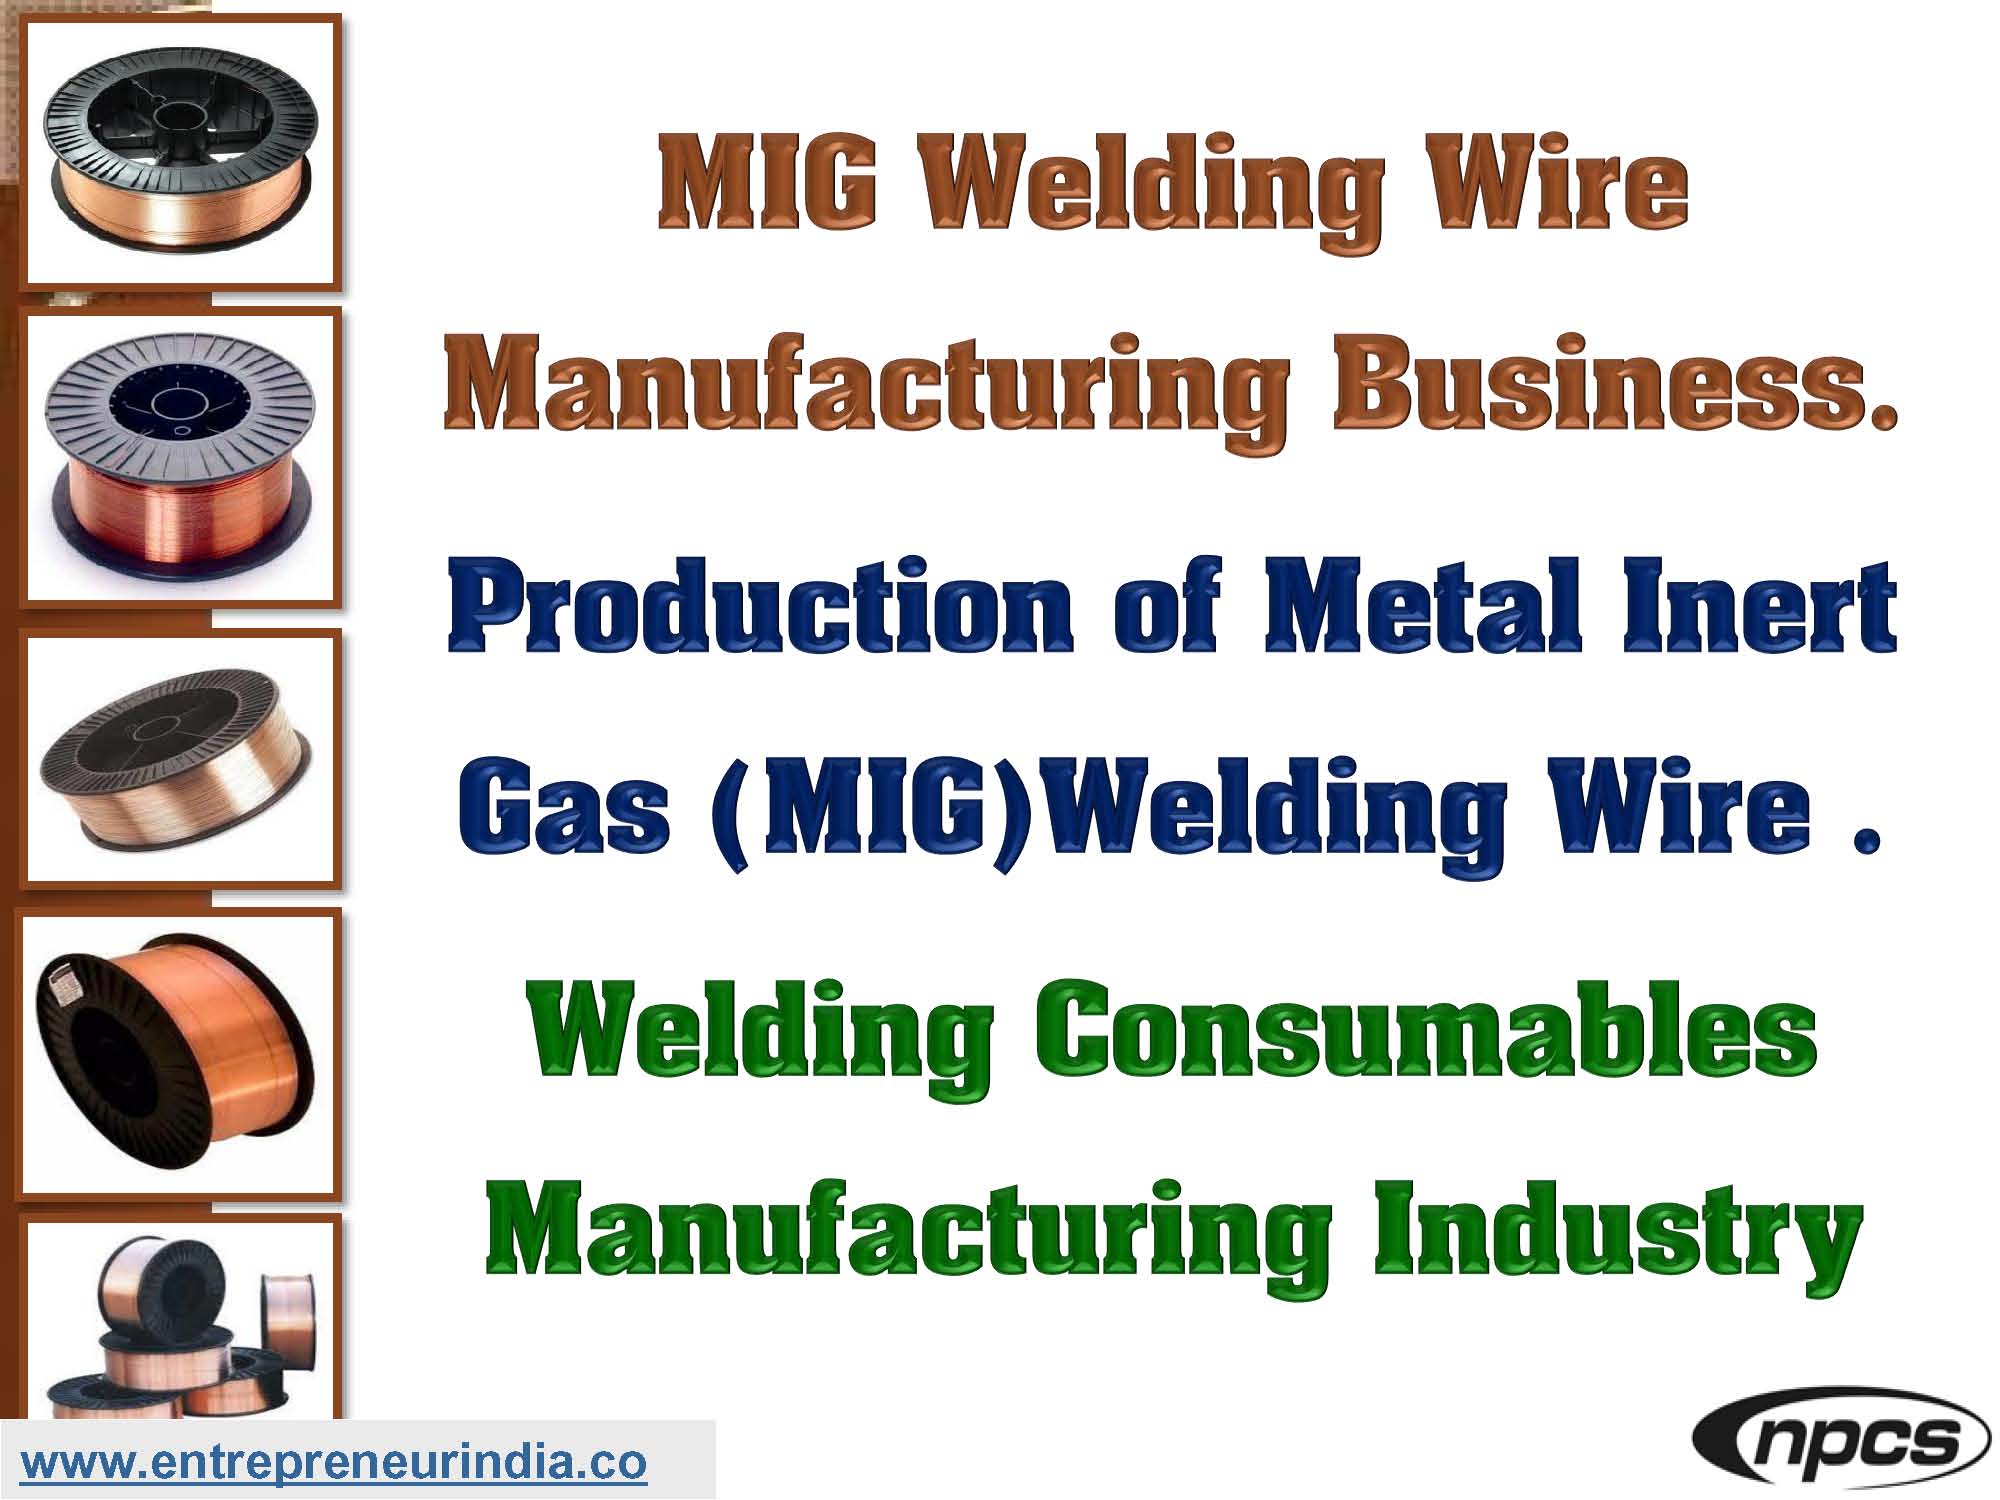 MIG Welding Wire Manufacturing Business